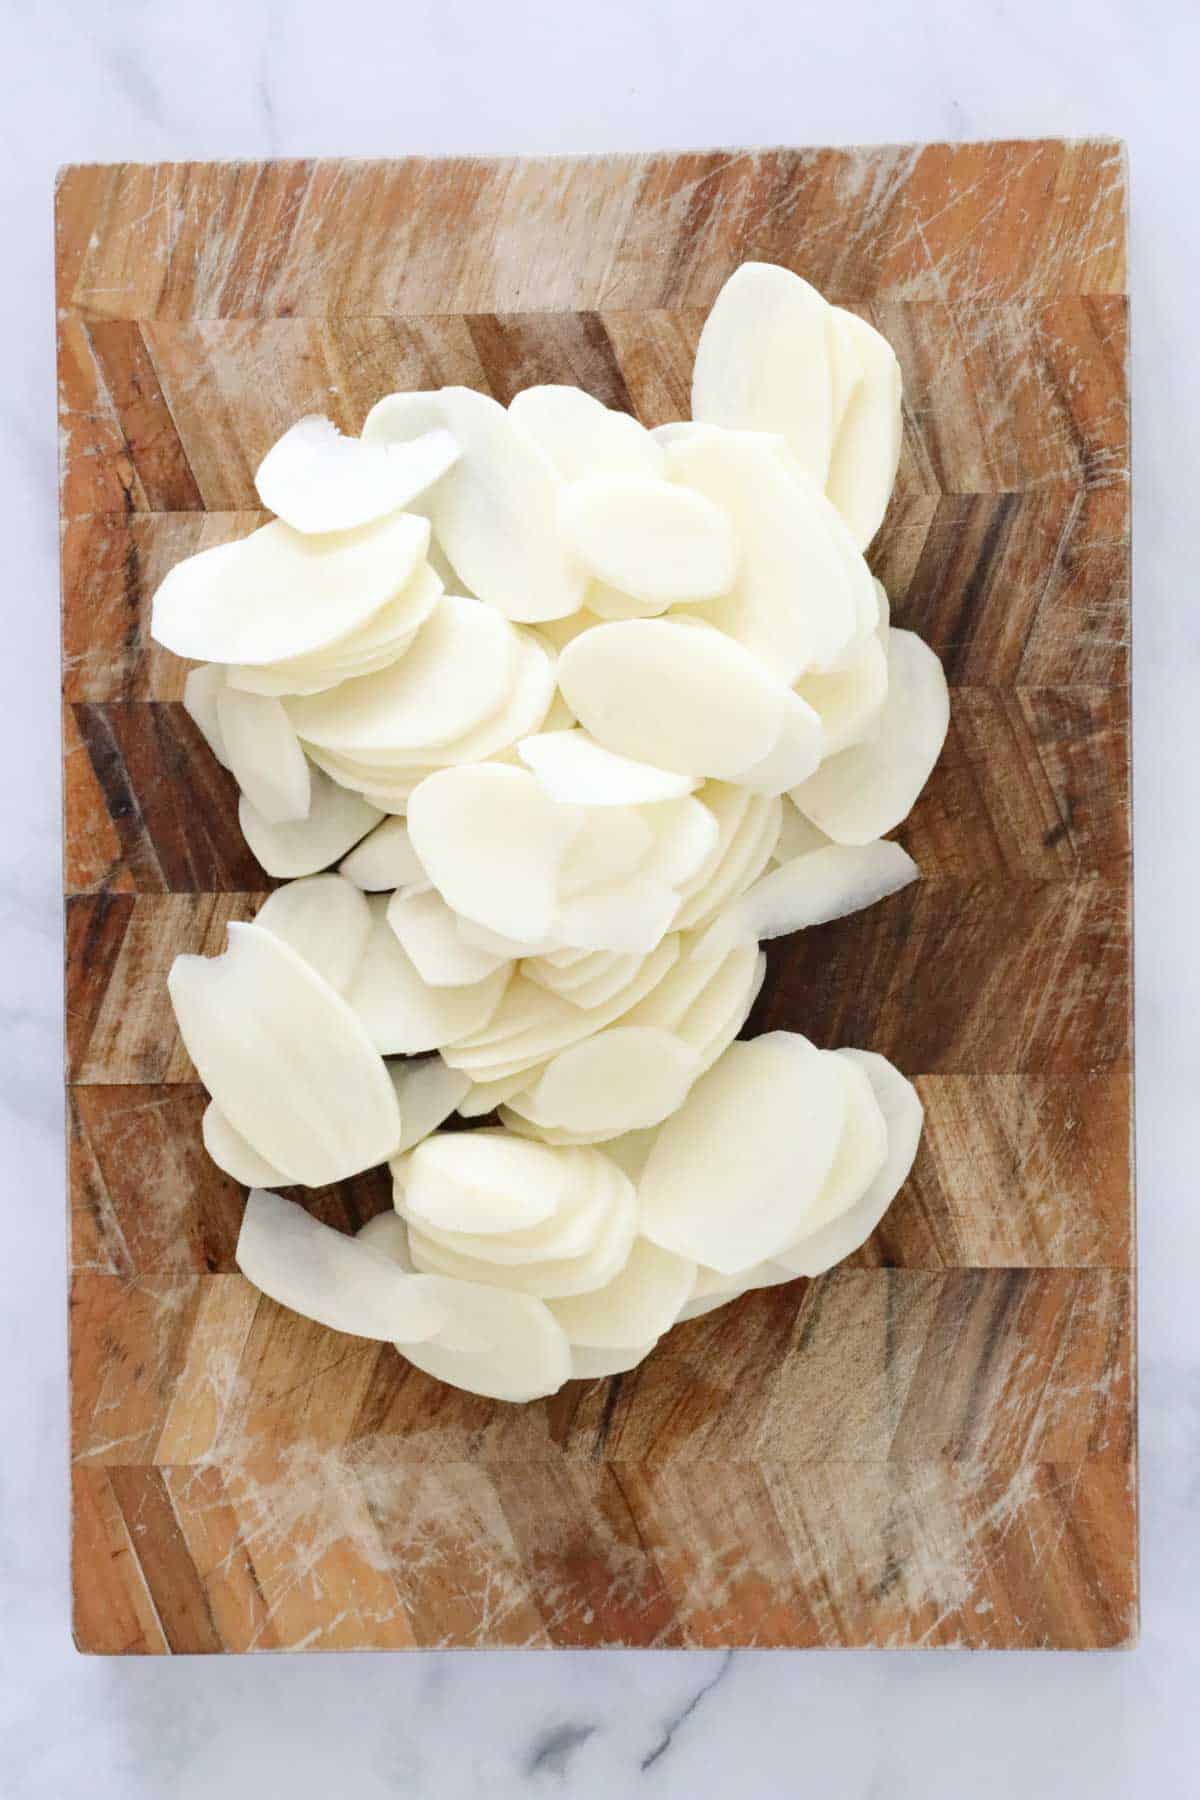 A pile of peeled and finely sliced potatoes on a wooden board.